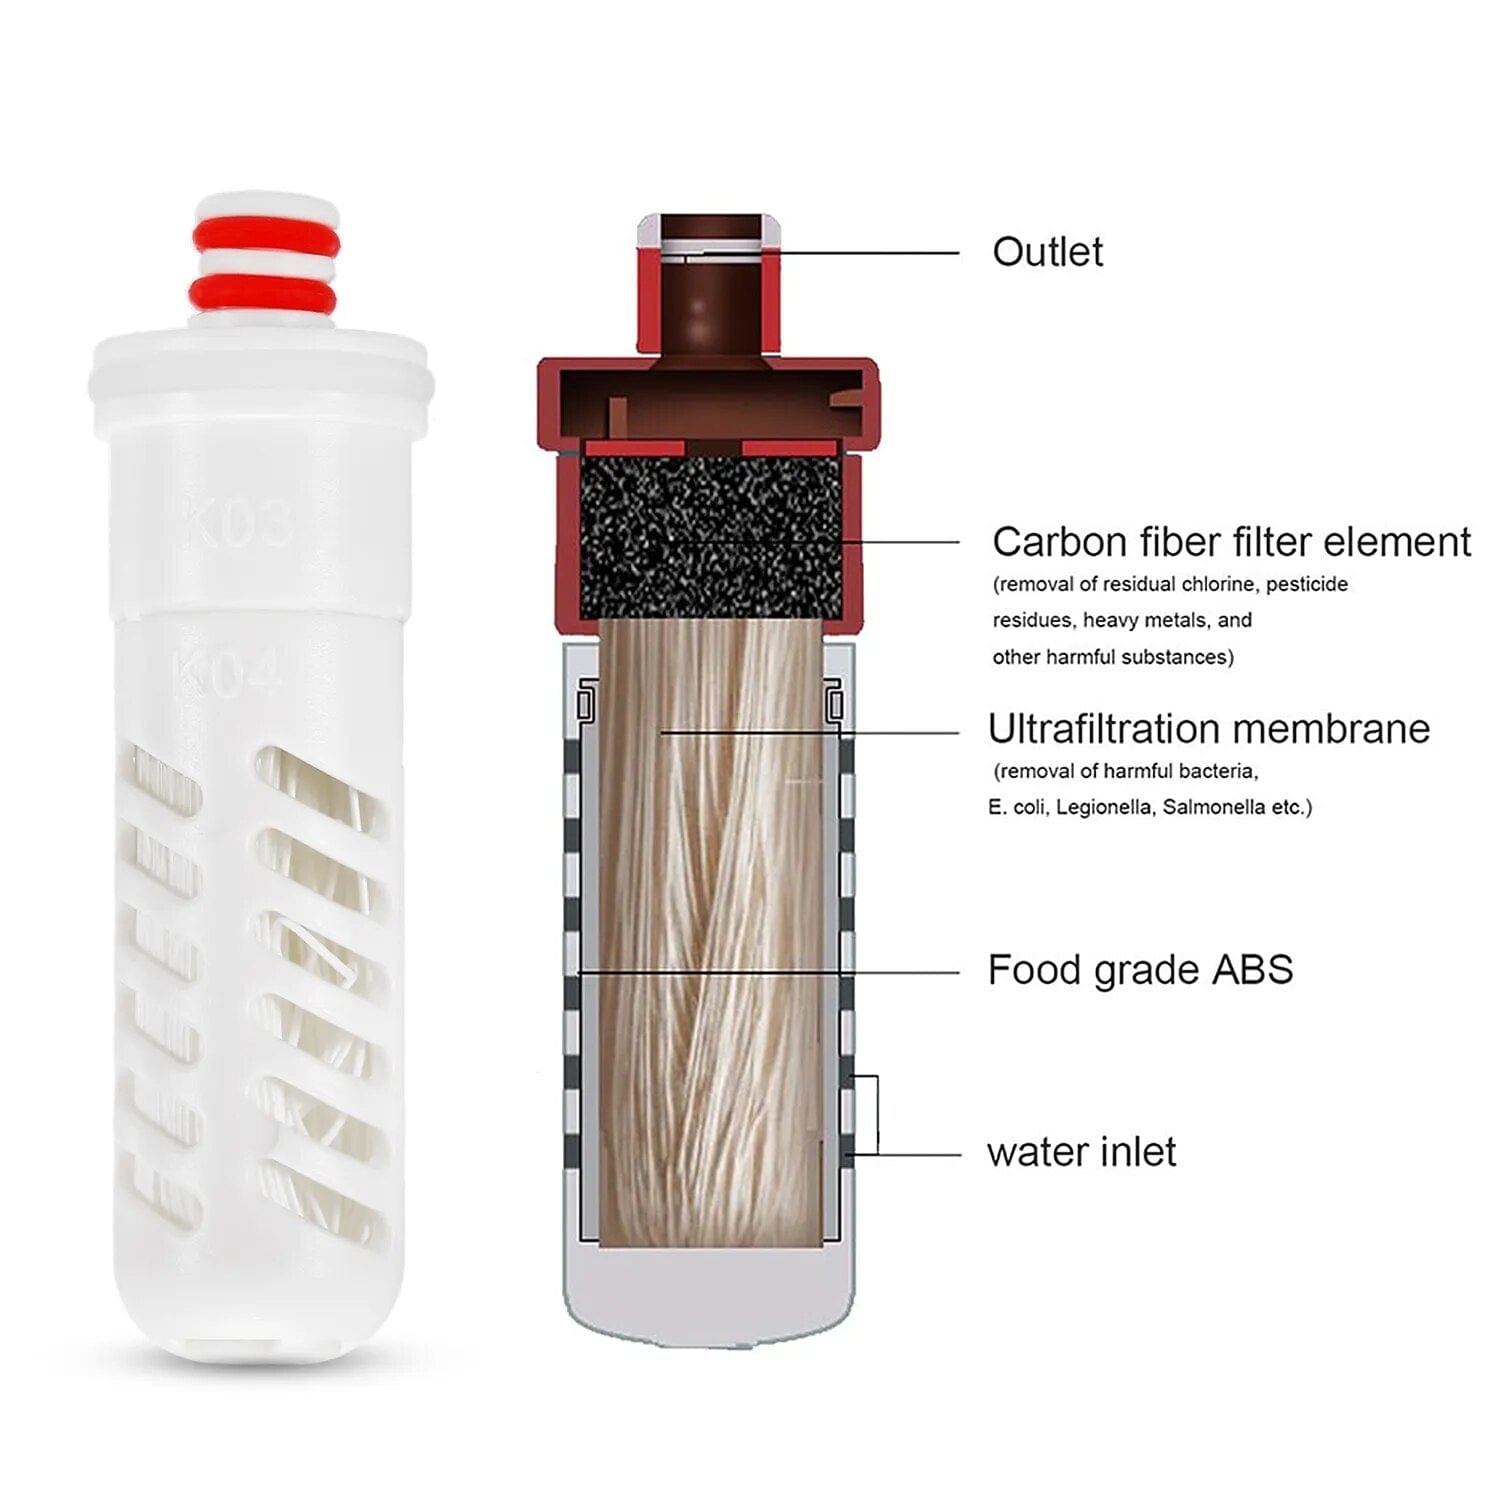 Lixada 500ml foldable drinking water bottle with filter